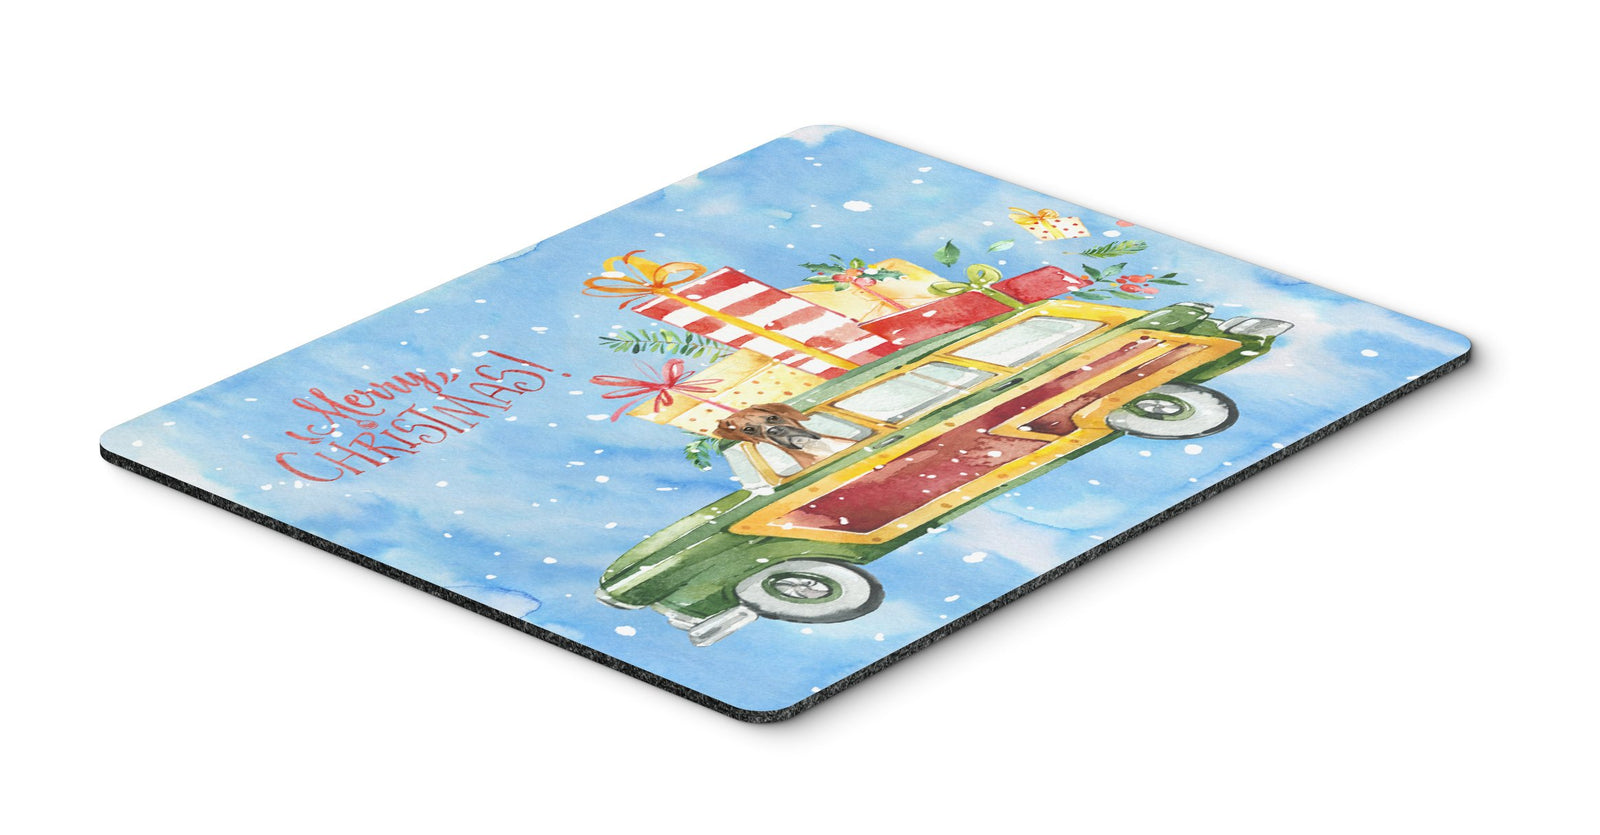 Merry Christmas Boxer Mouse Pad, Hot Pad or Trivet CK2399MP by Caroline's Treasures